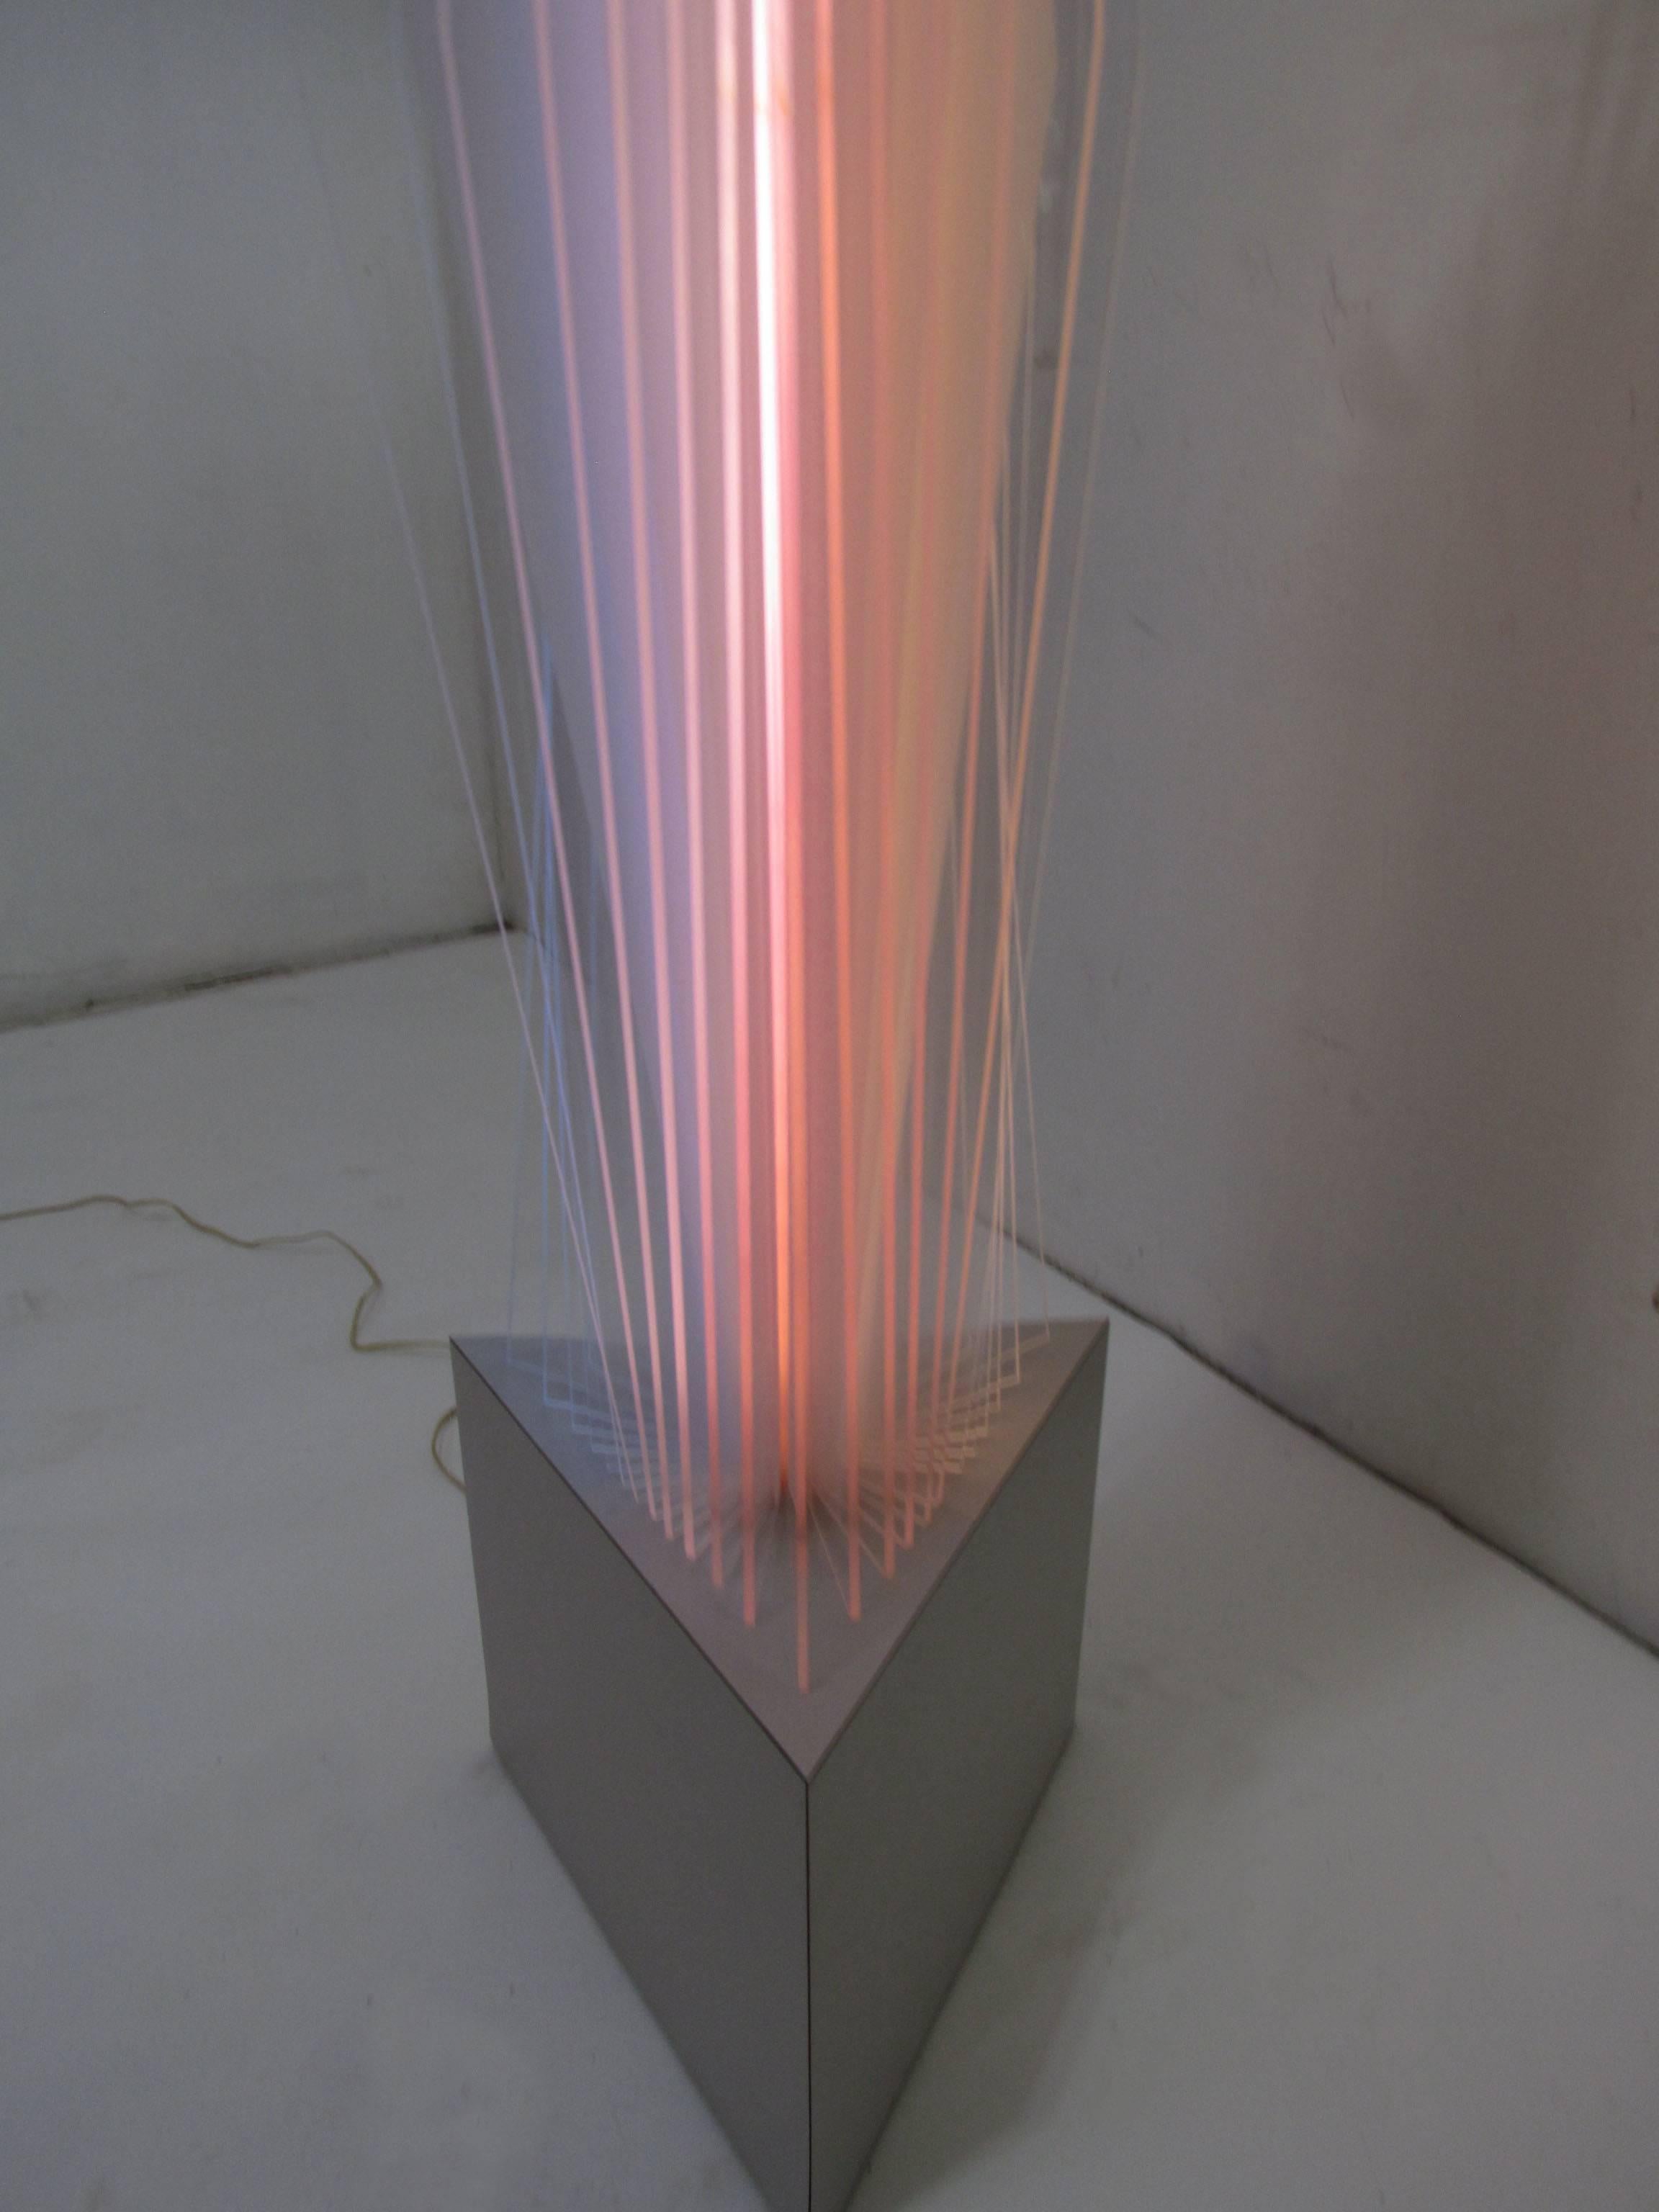 Late 20th Century Lucite Light Sculpture from the Estate of Norman Mercer, circa 1980s